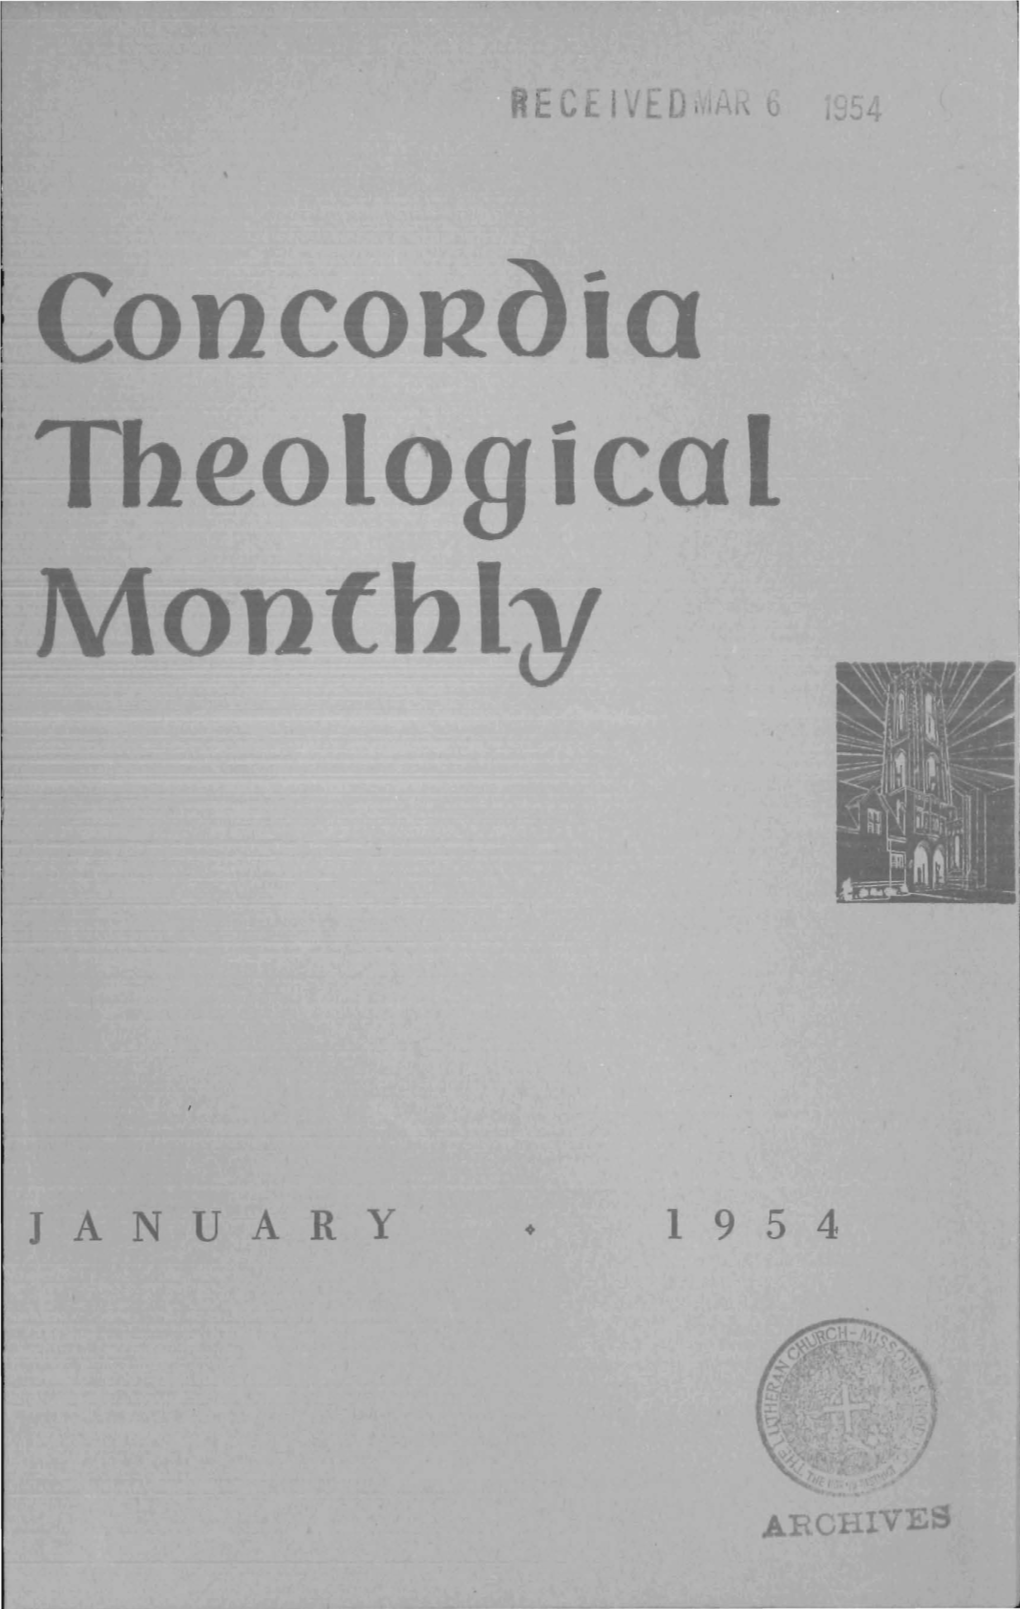 Concoll()Ia Theological Monthly